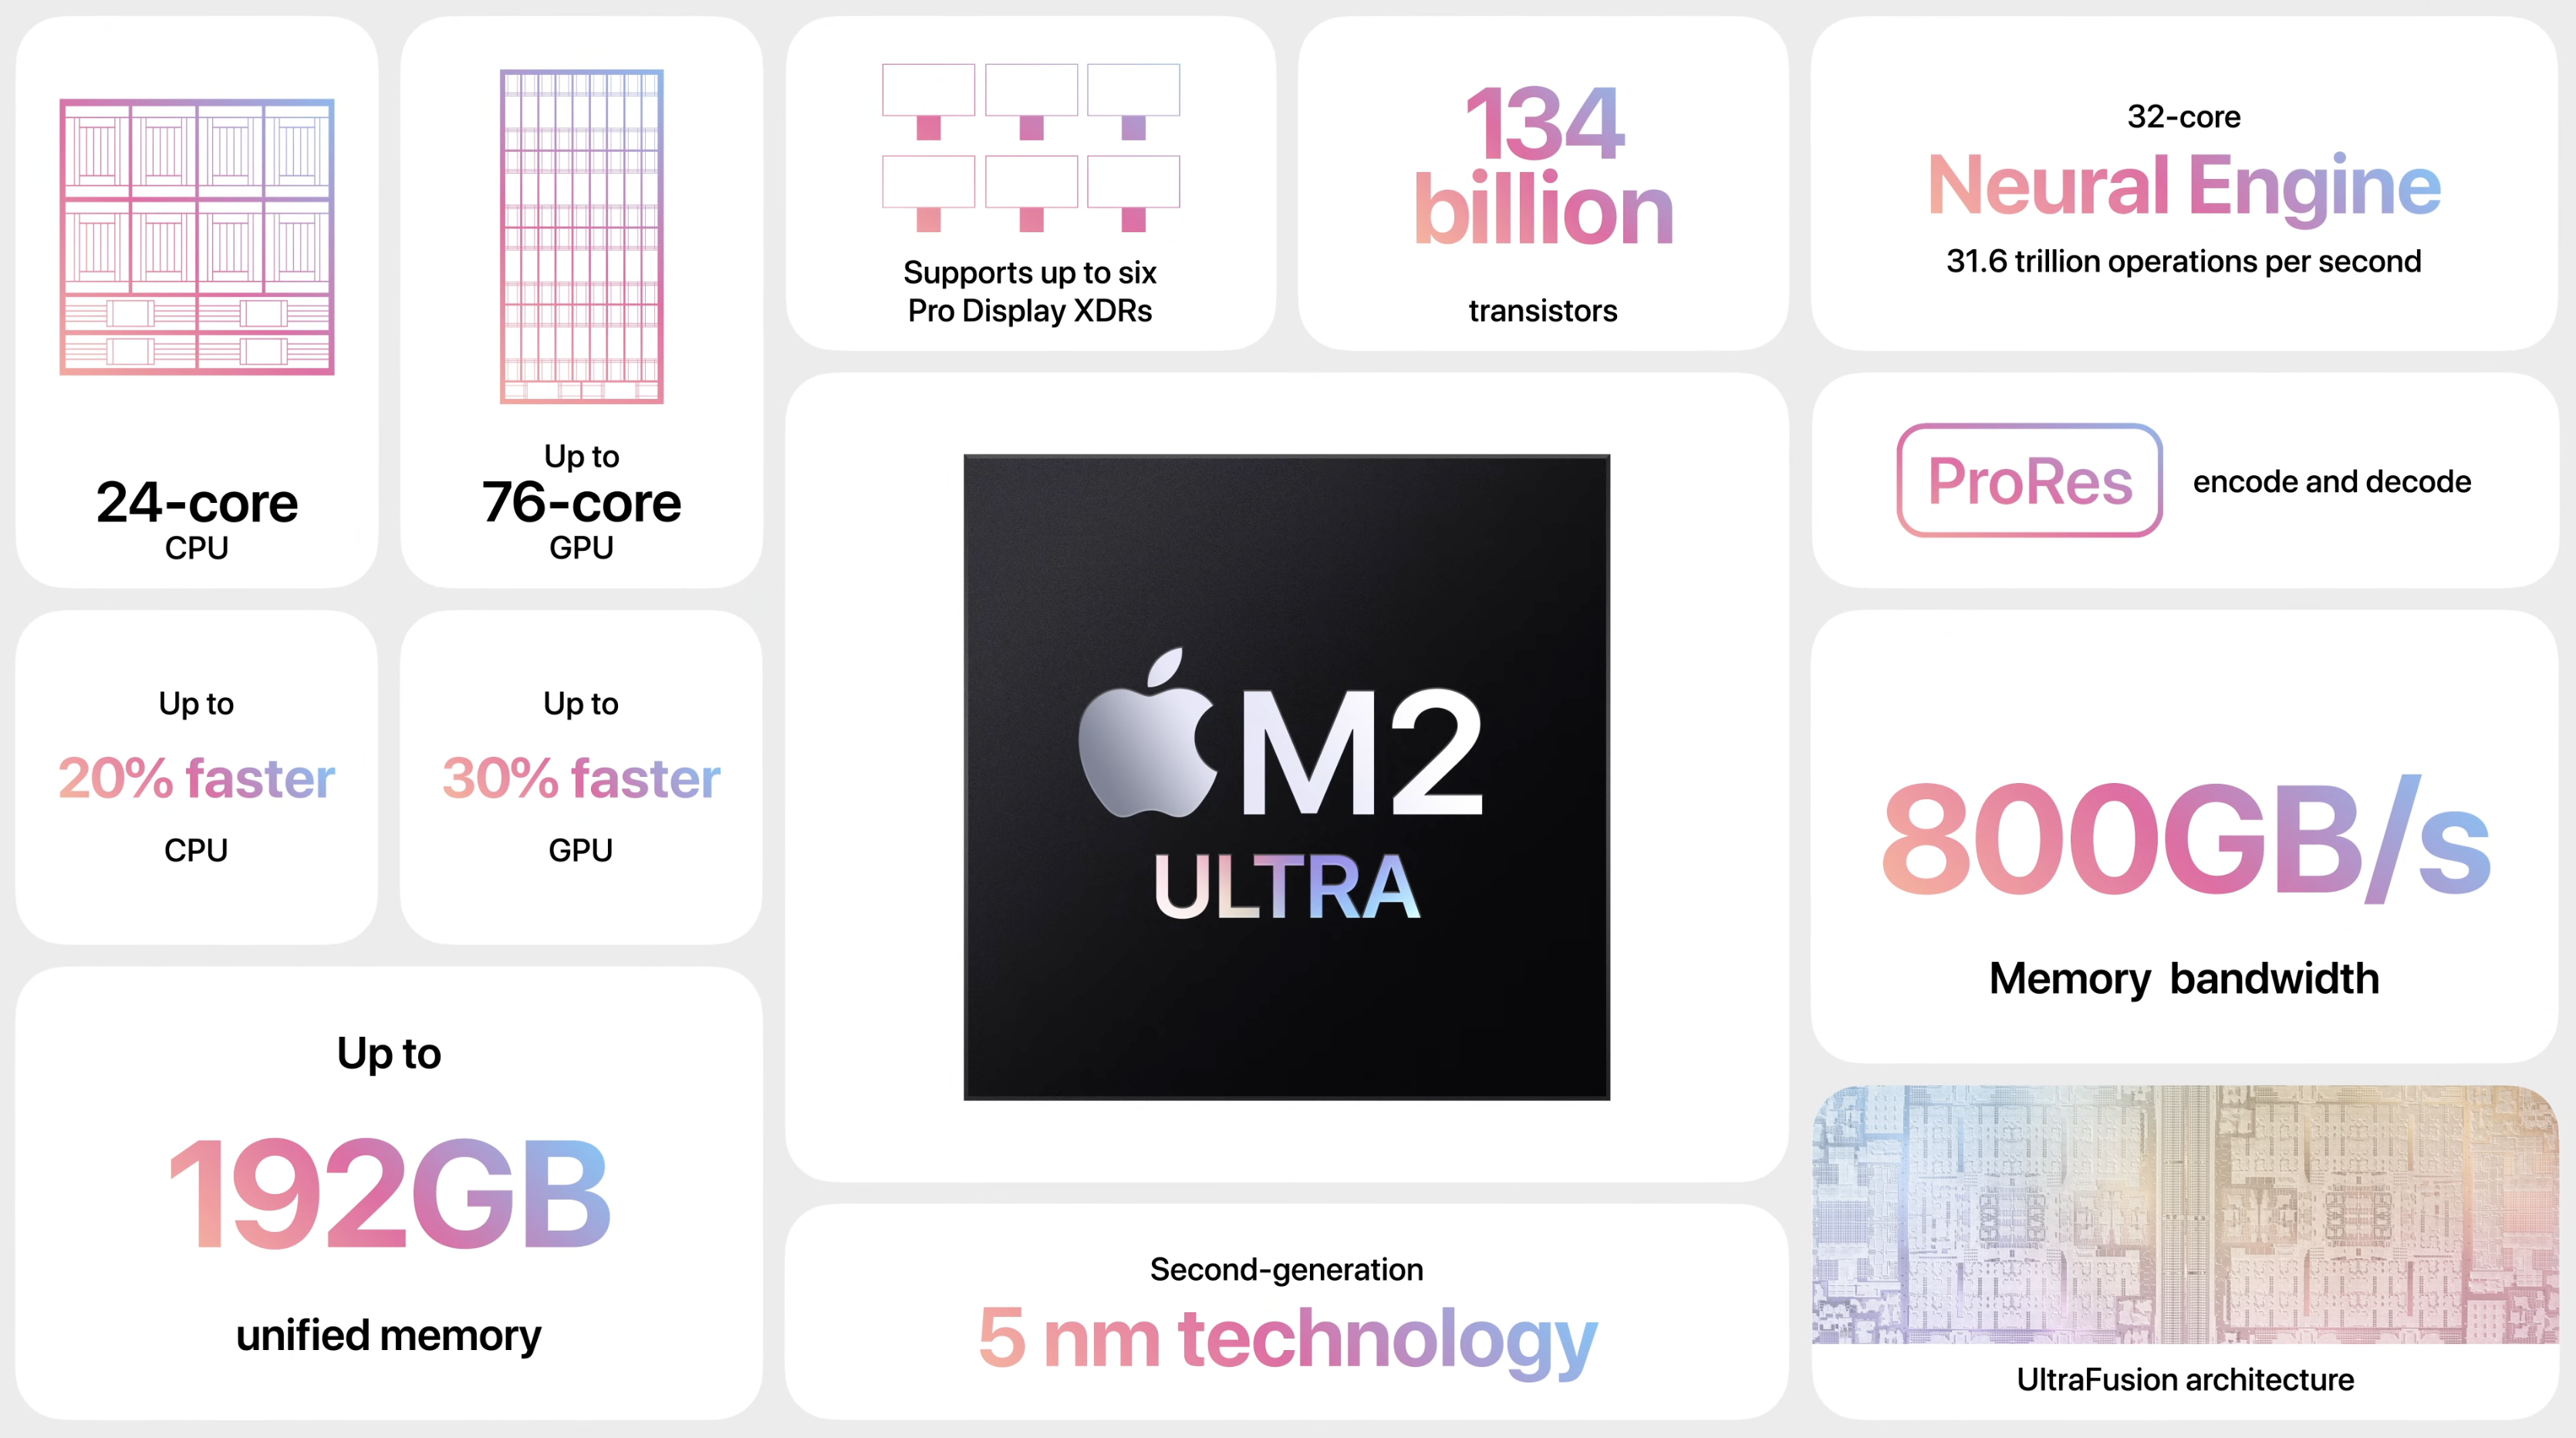 apple m2 ultra chip 192gb unified ml model training 648203b58750d sej - WWDC 2023: How Apple Could Revolutionize The Way We Work